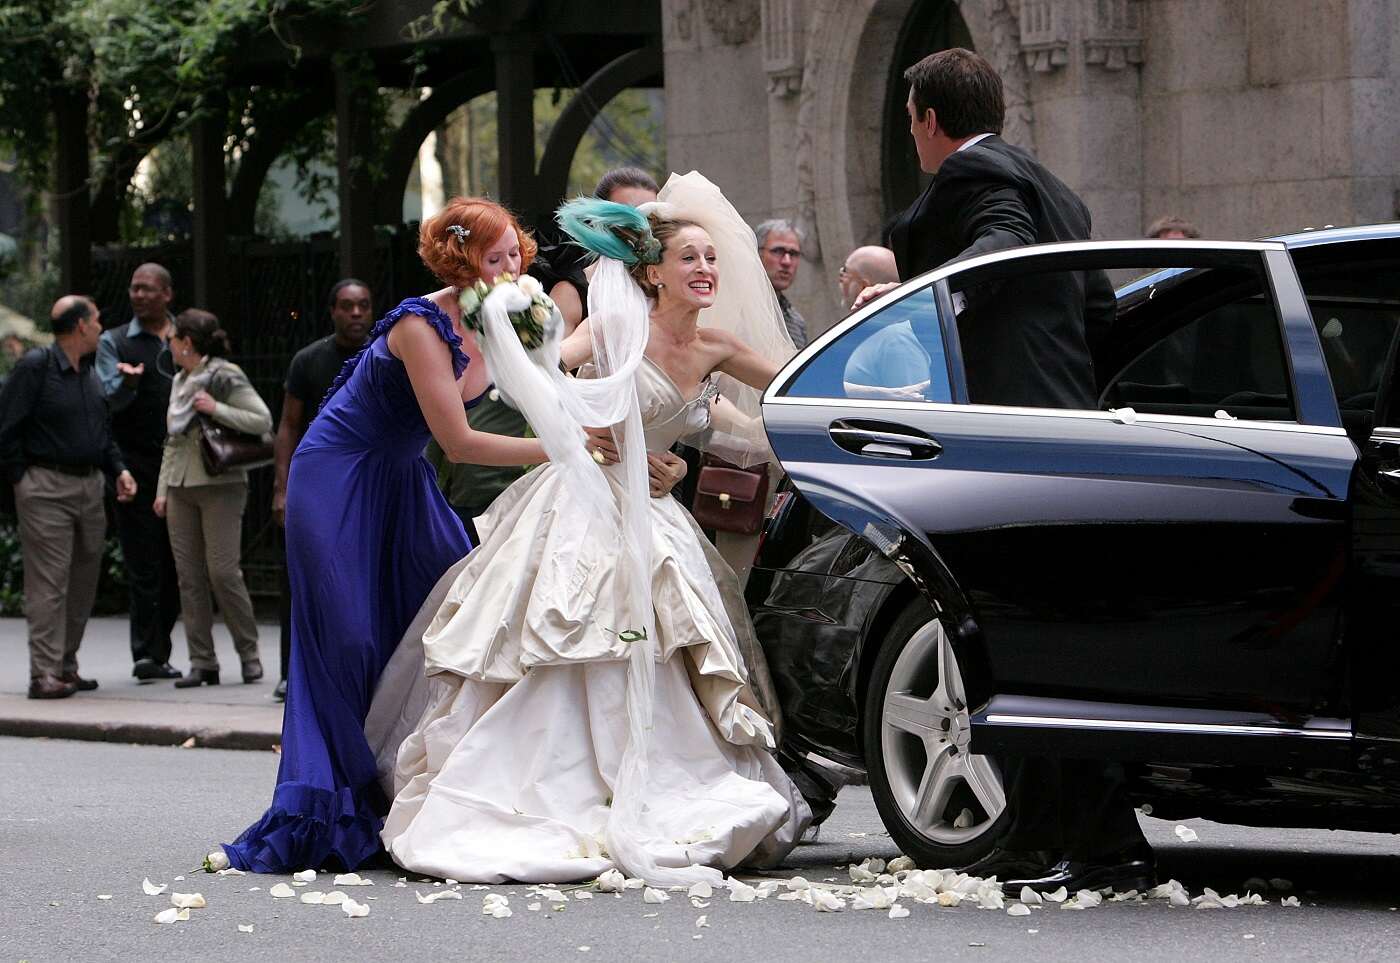 Cynthia Nixon, Kristin Davis, Sarah Jessica Parker and Chris Noth after leaving Carrie and Mr. BIg's ill-fated wedding in 'Sex and the City: The Movie' 